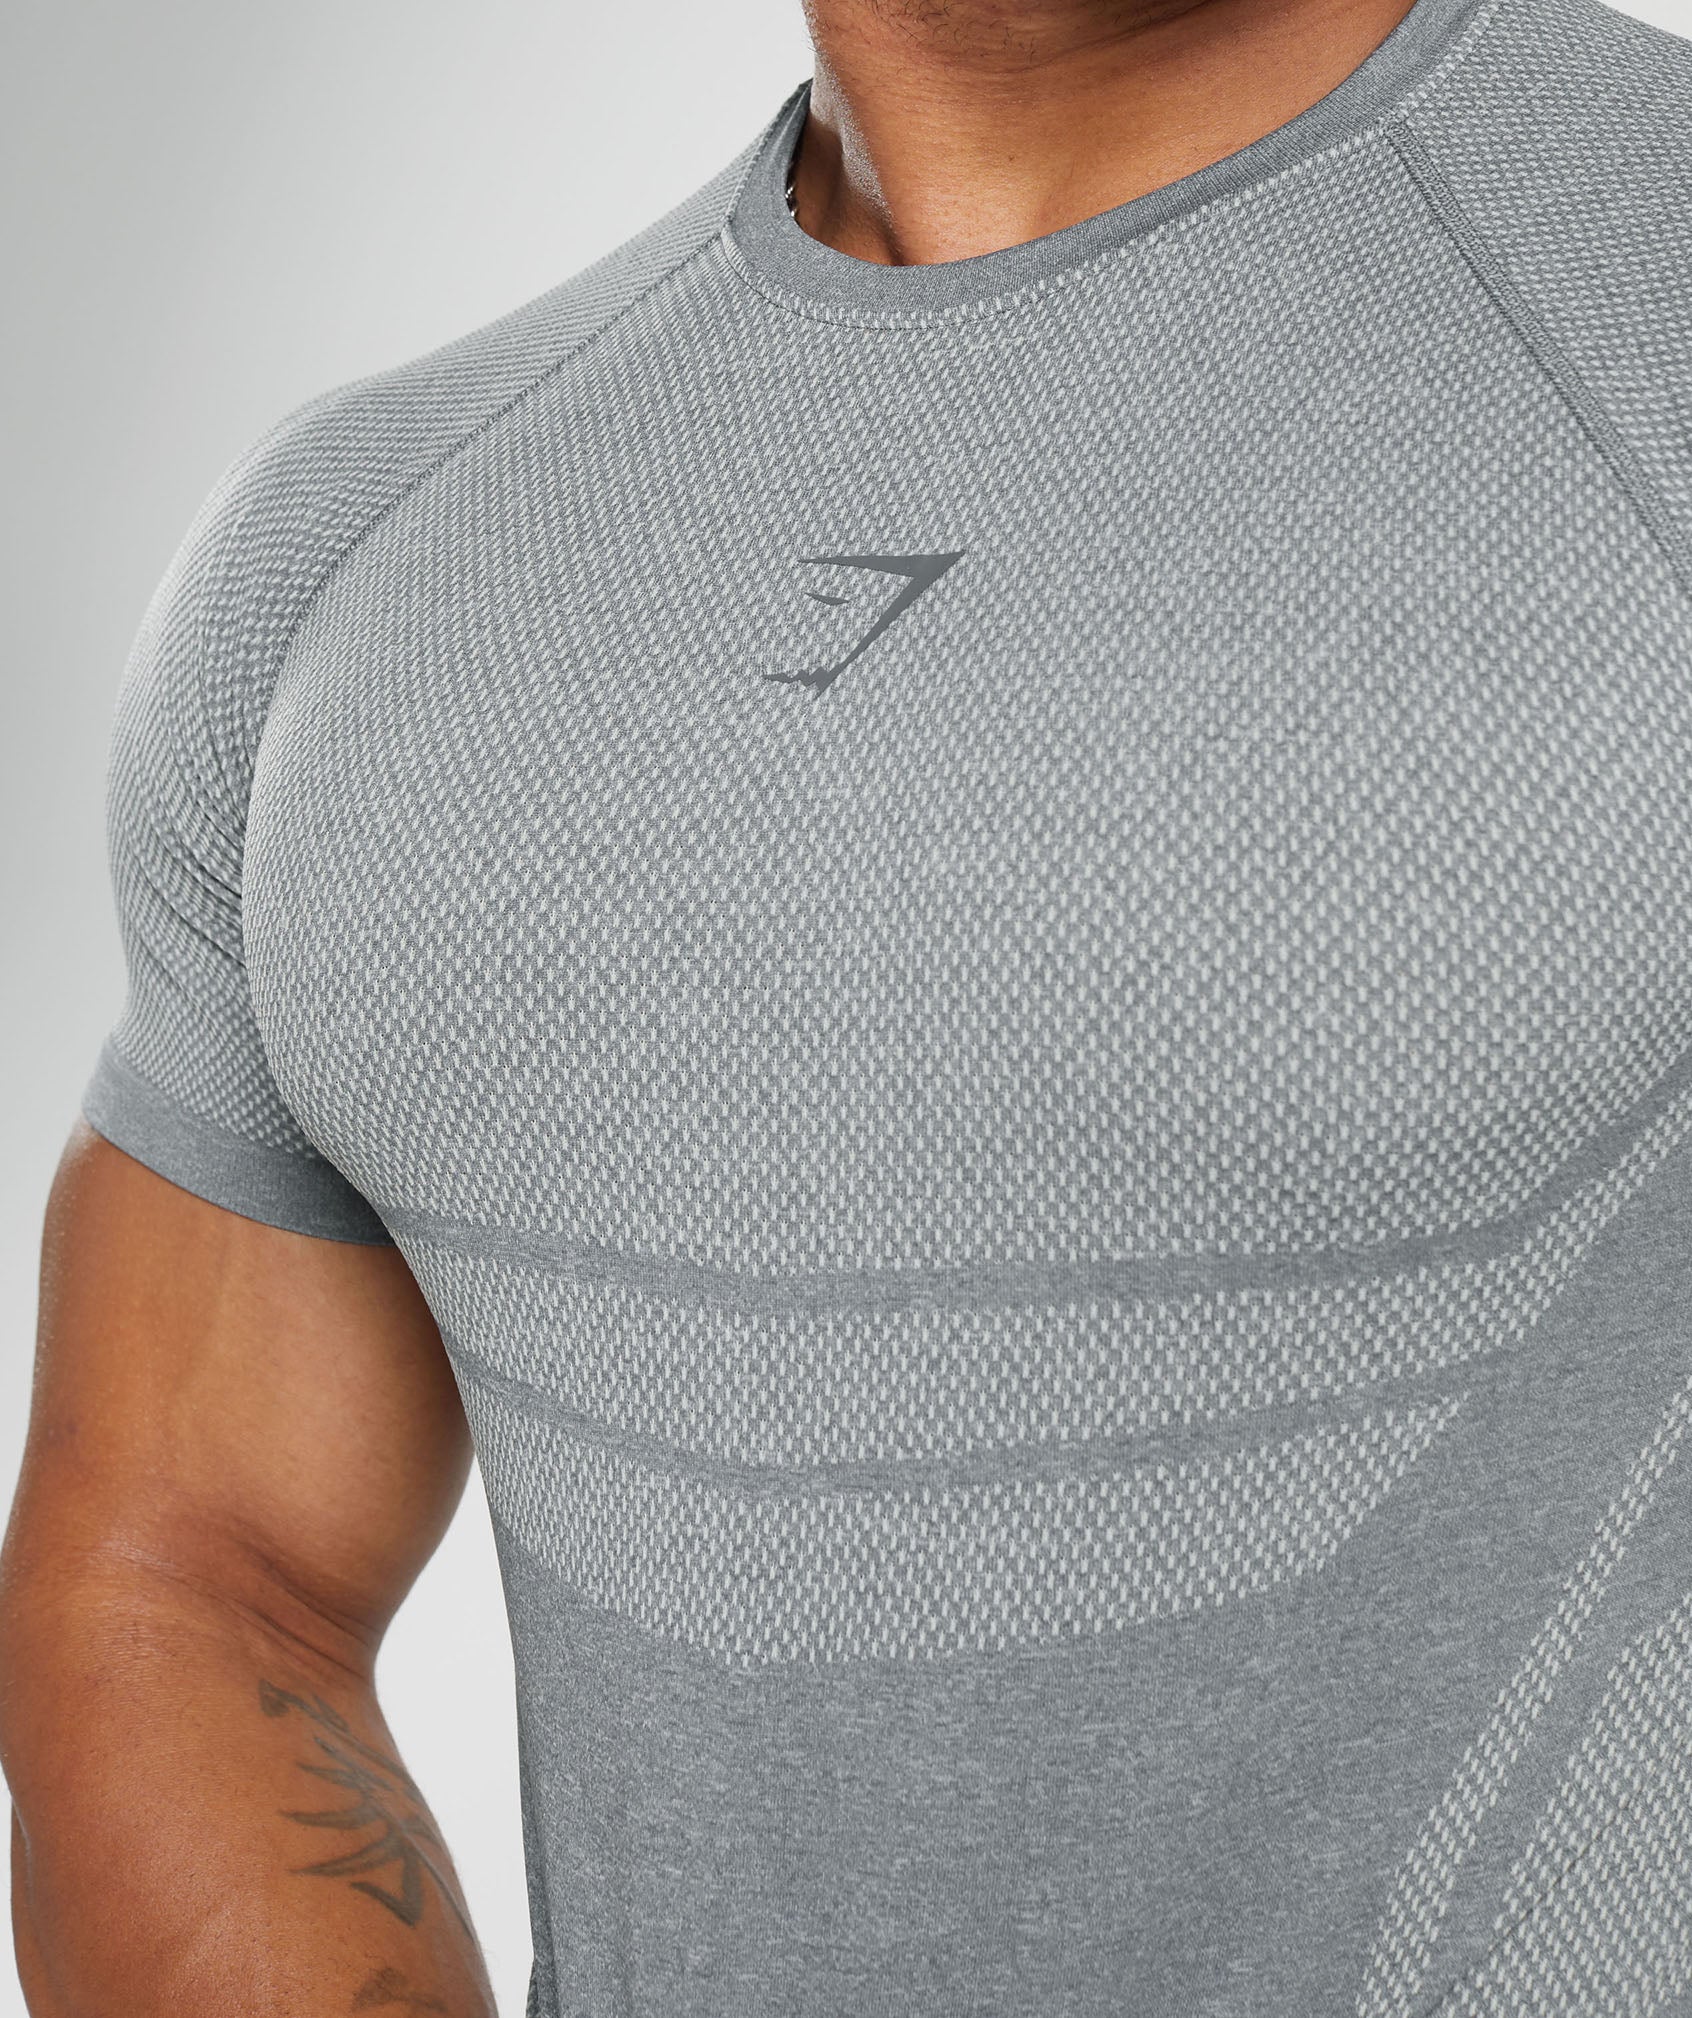 Elite Seamless T-Shirt in Pitch Grey/Light Grey - view 6